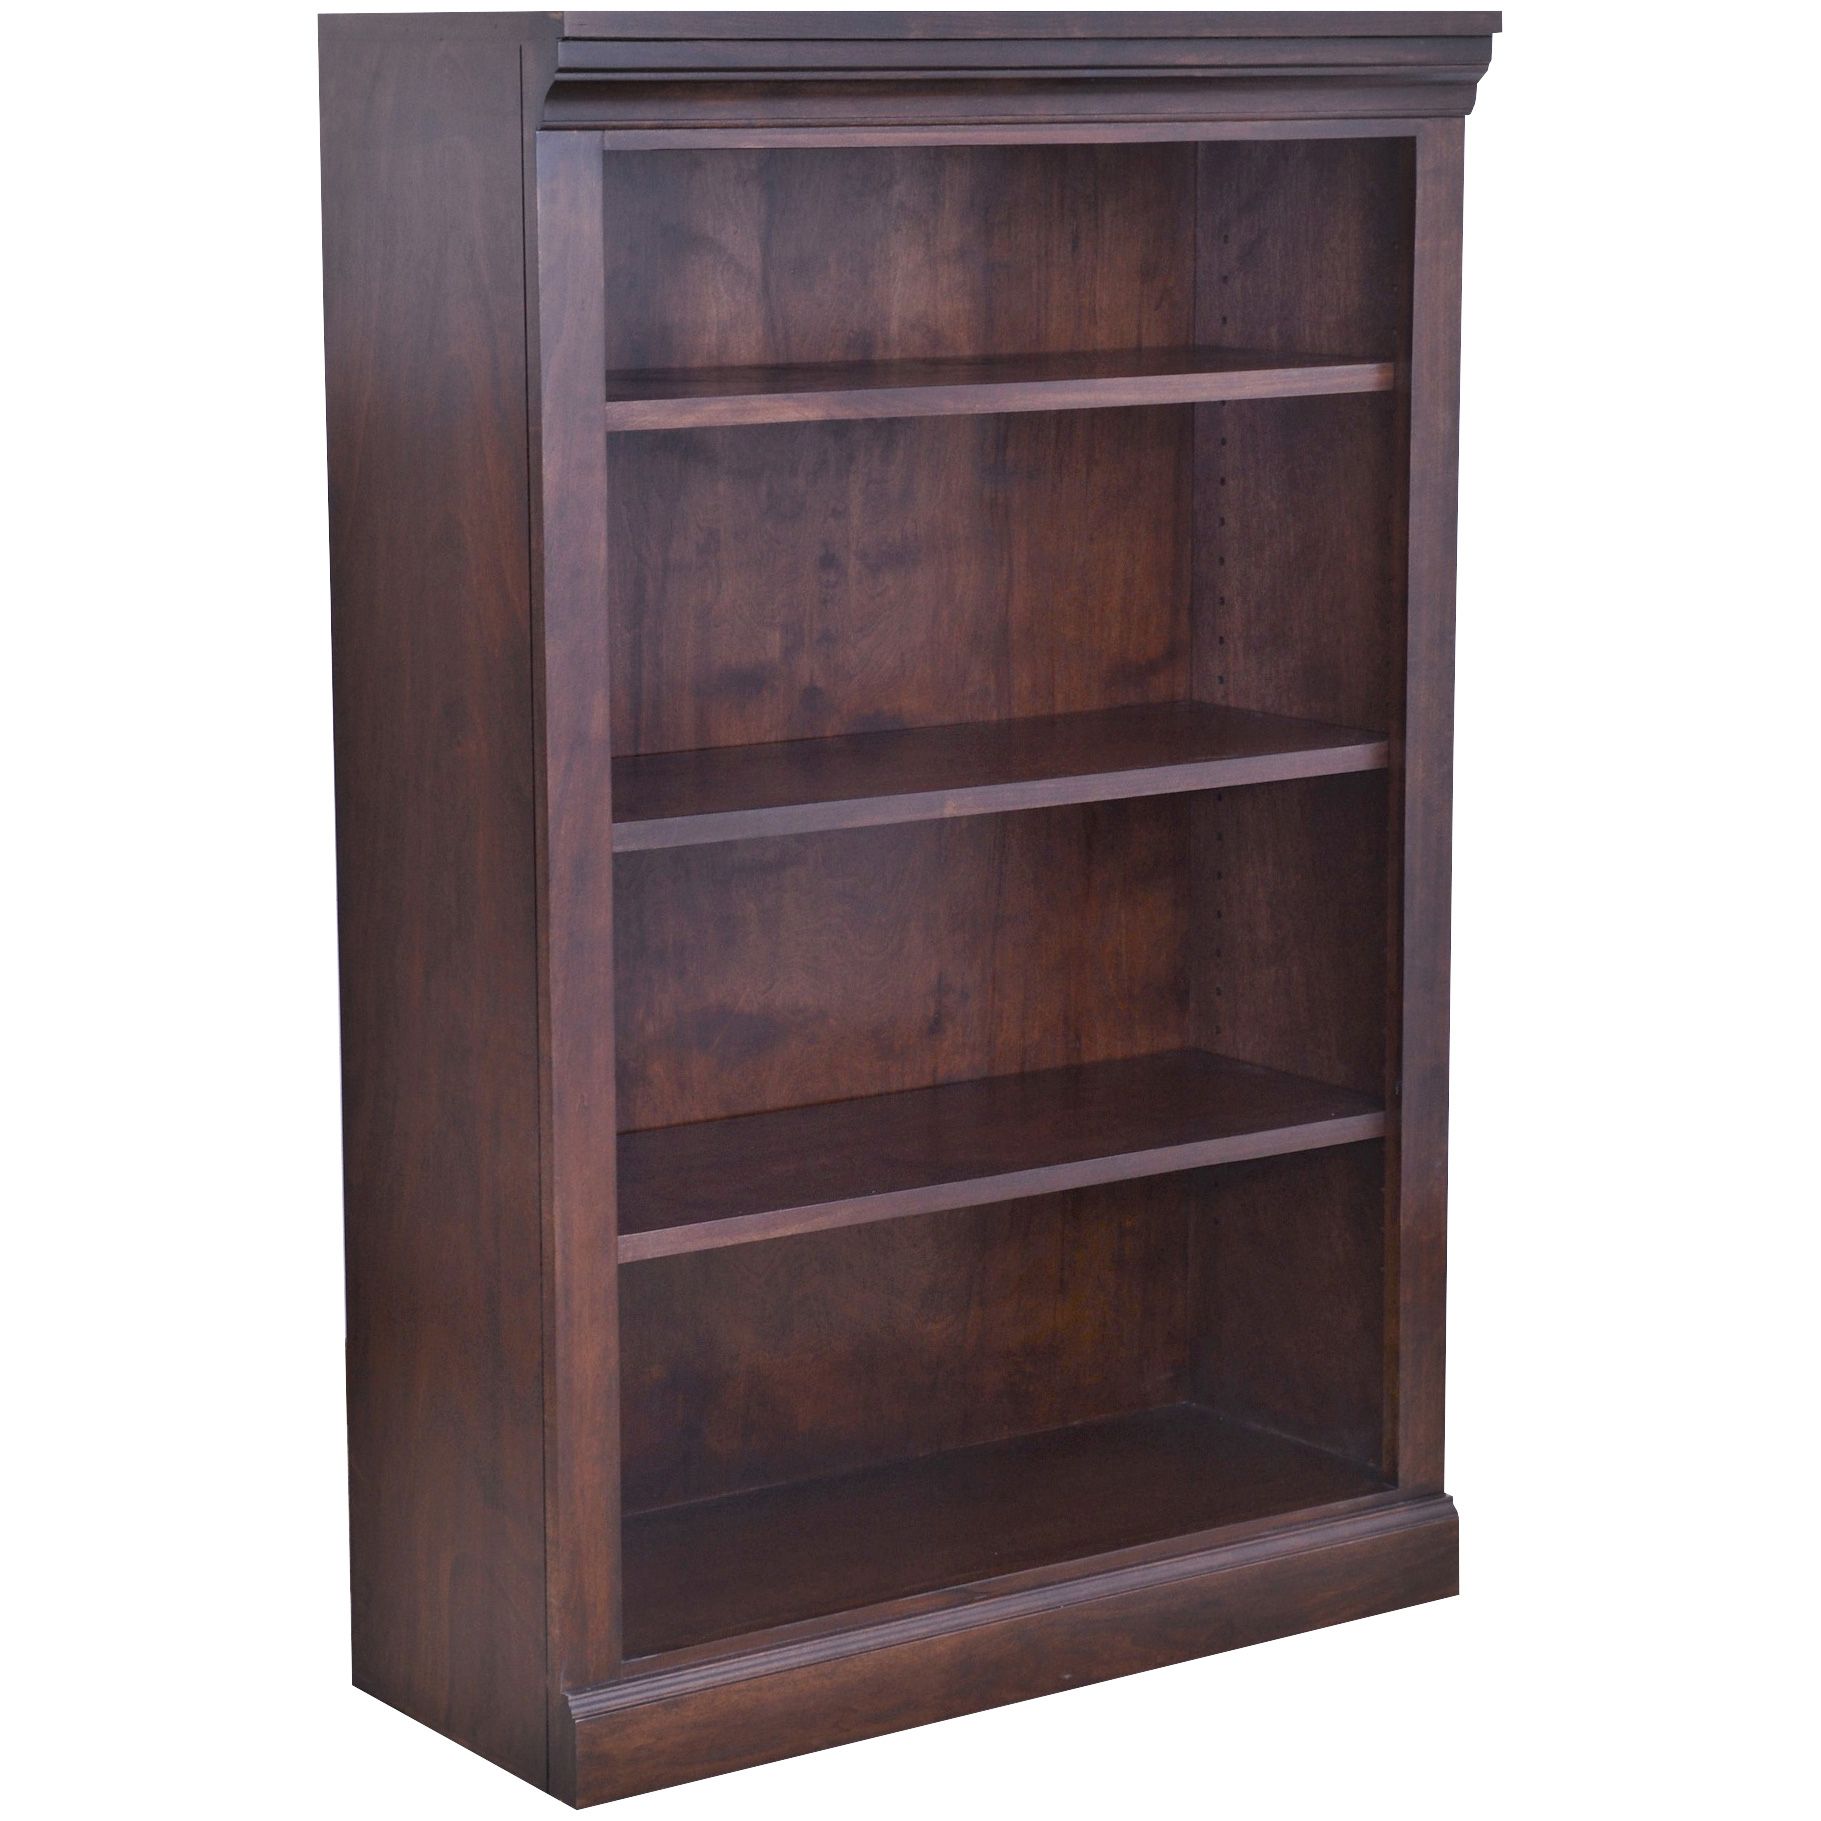 Classic 48 Inch Bookcase | Home Decor | Slumberland Inside 48 Inch Bookcases (View 12 of 15)